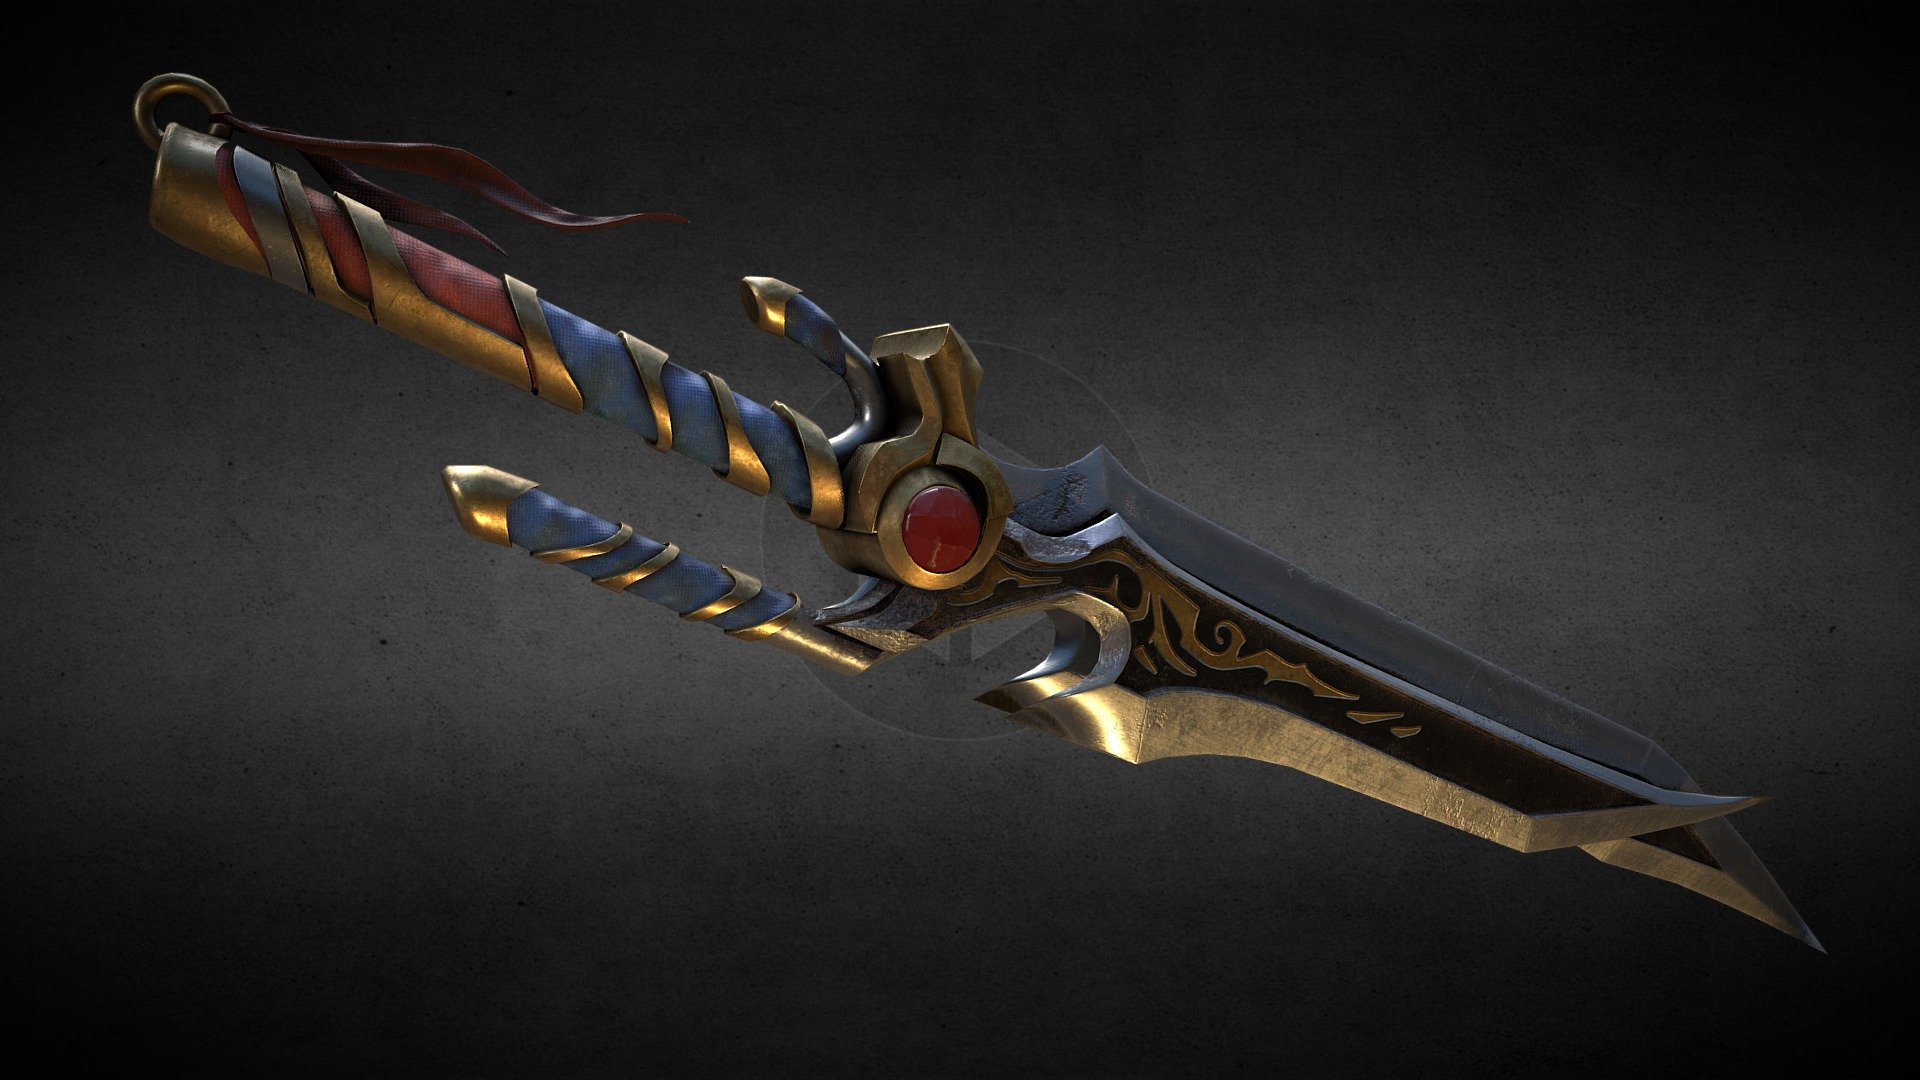 Roman Guro's original concept art can be found here.

I've grown up with fantasy-genre games so I wanted to add some fantasy style models to my portfolio. I worked on this sword over the course of a weekend and overall I'm pretty happy with how it turned out for how quickly I knocked it out 3d model